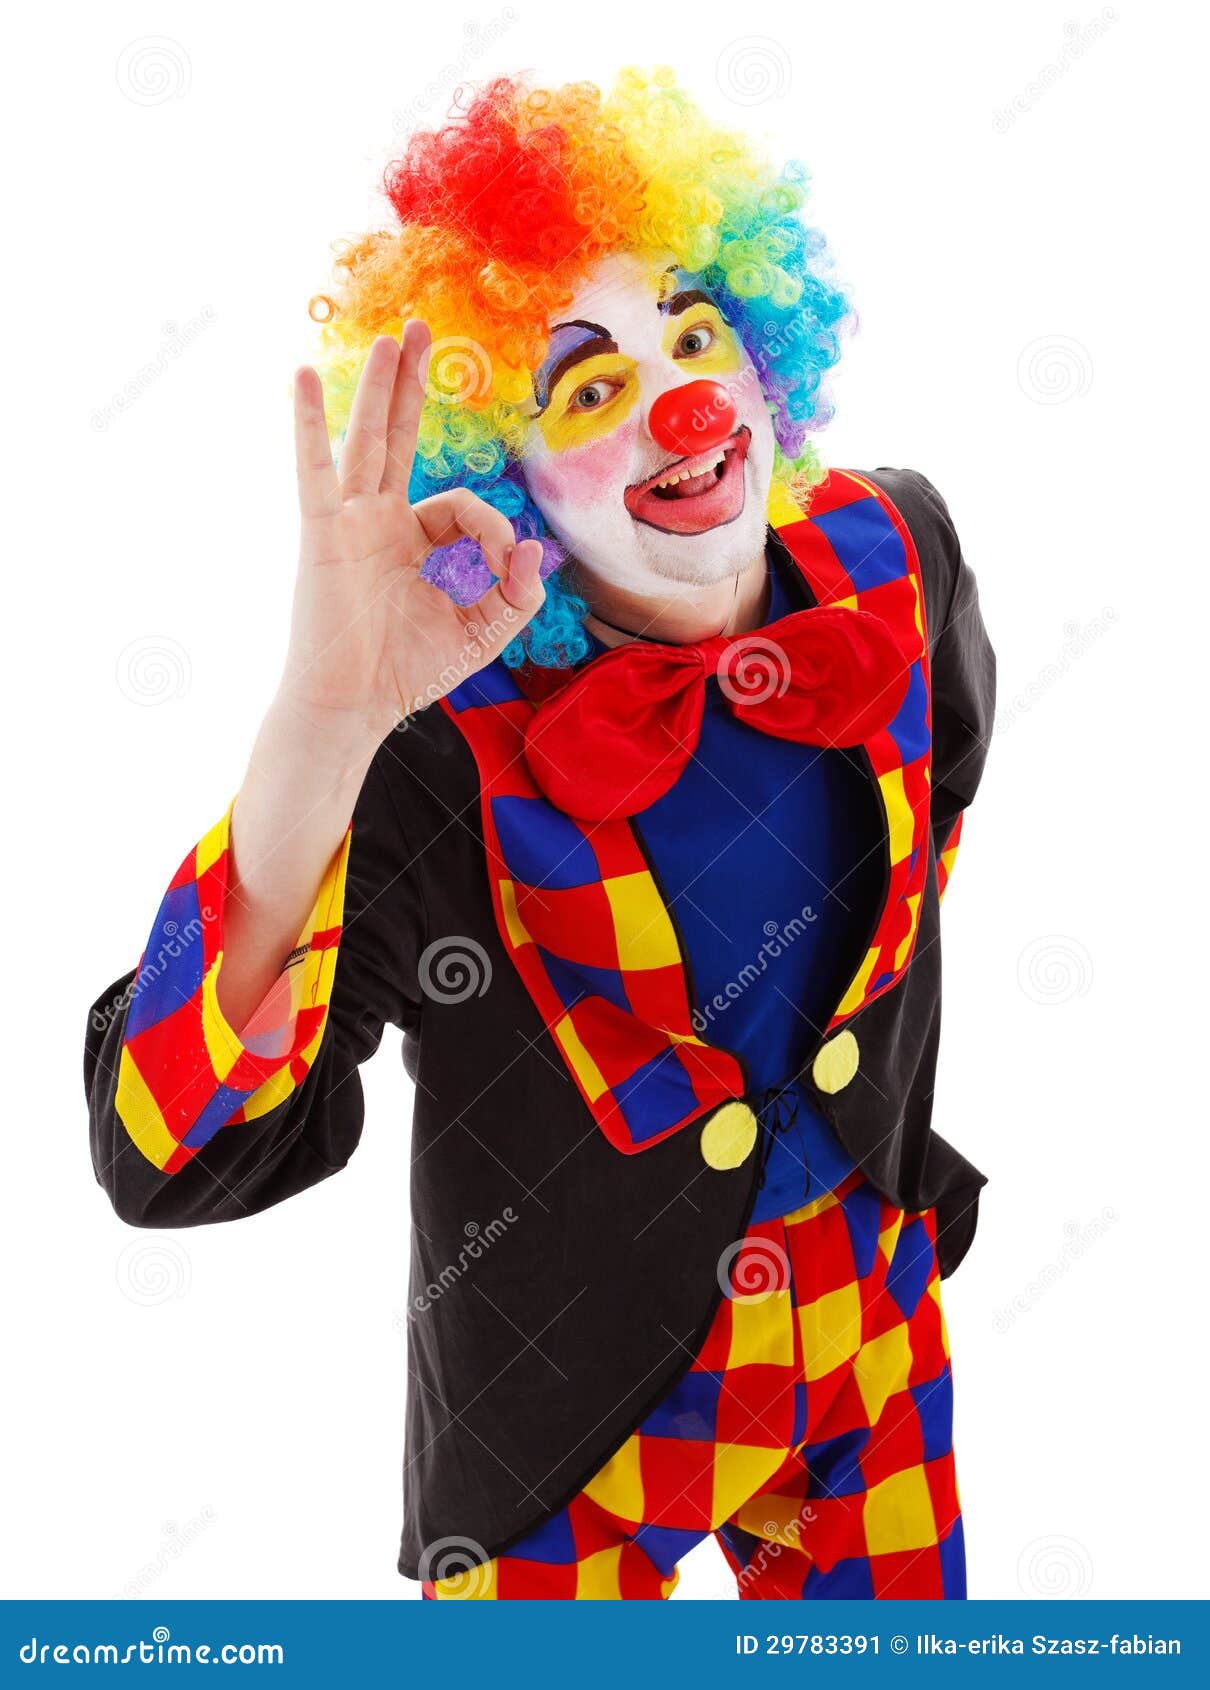 smiling-clown-showing-ok-sign-his-hand-29783391.jpg